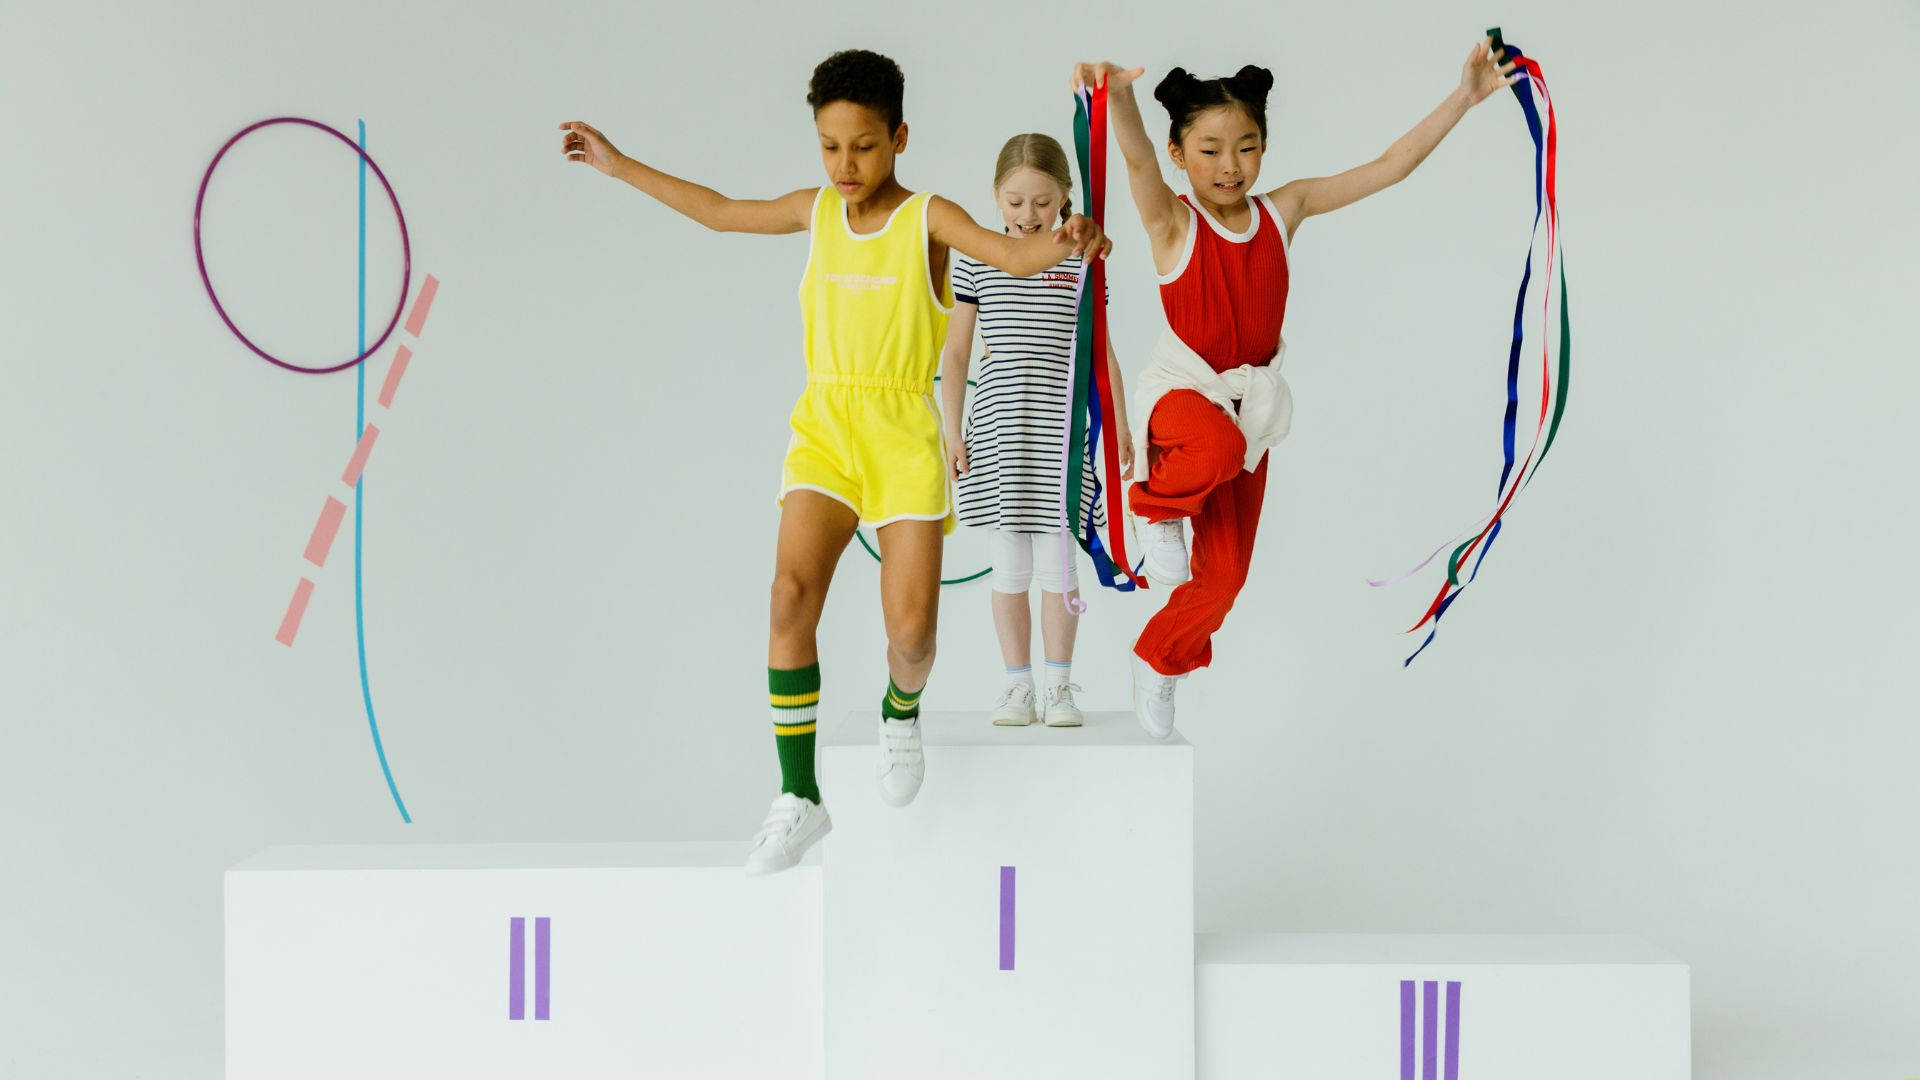 Cheerful Children On Olympic Sports Wallpaper